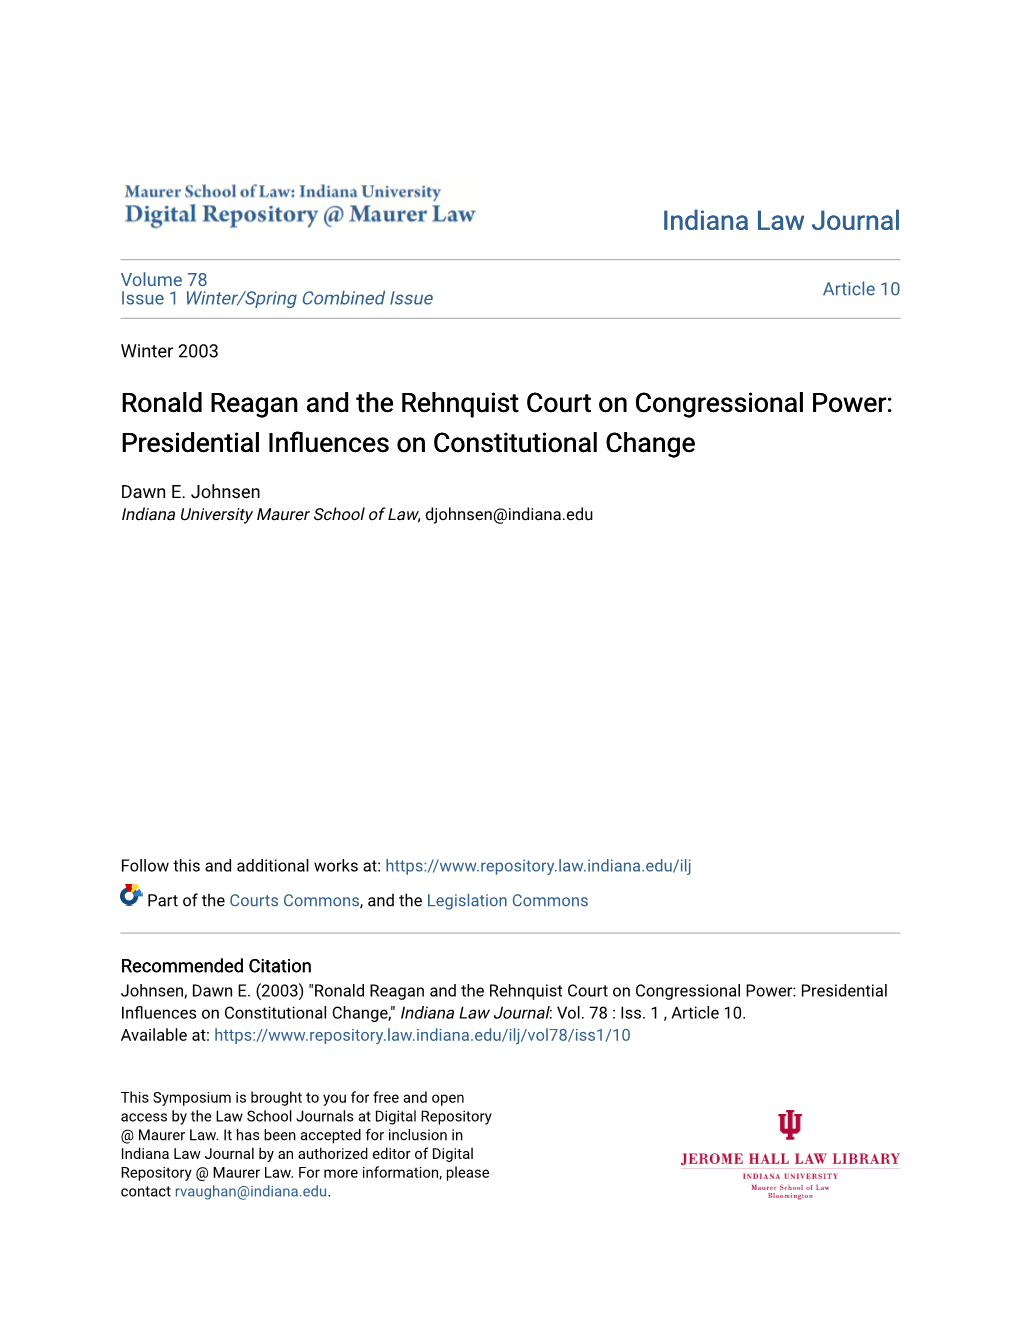 Ronald Reagan and the Rehnquist Court on Congressional Power: Presidential Influences on Constitutional Change